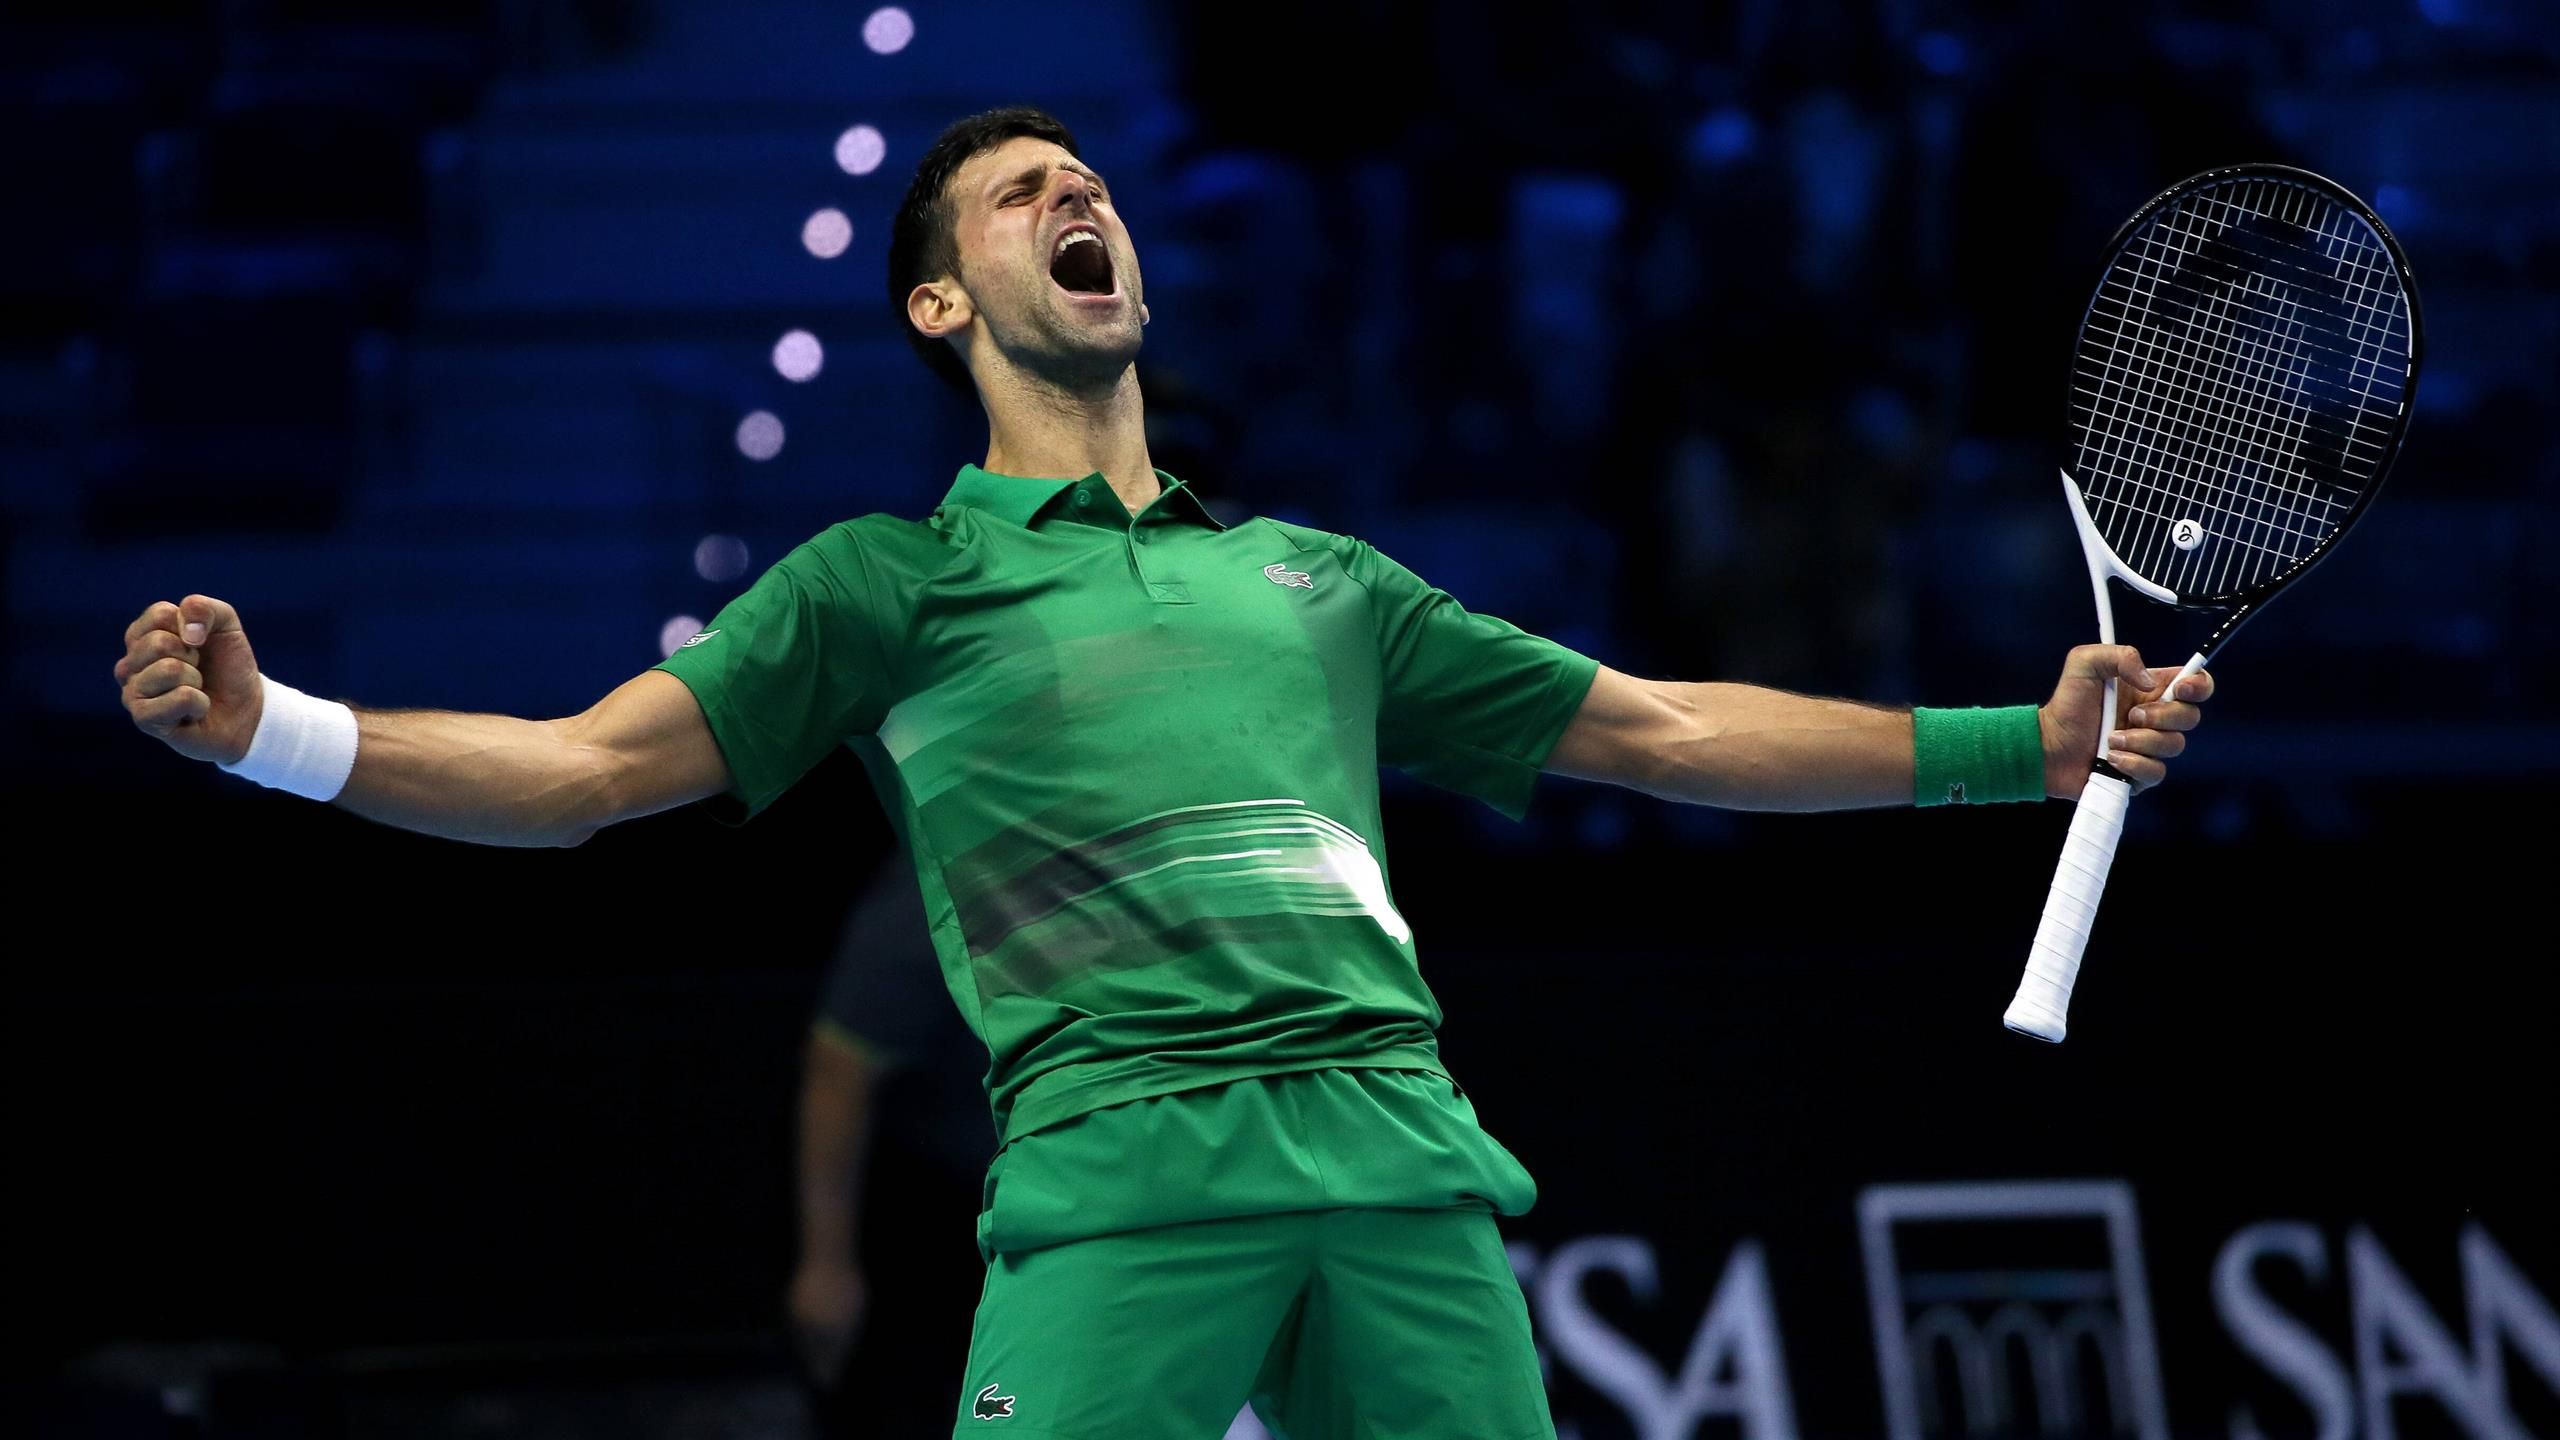 Novak Djokovic digs deep and battles past Taylor Fritz in straight sets to reach final of 2022 ATP Finals